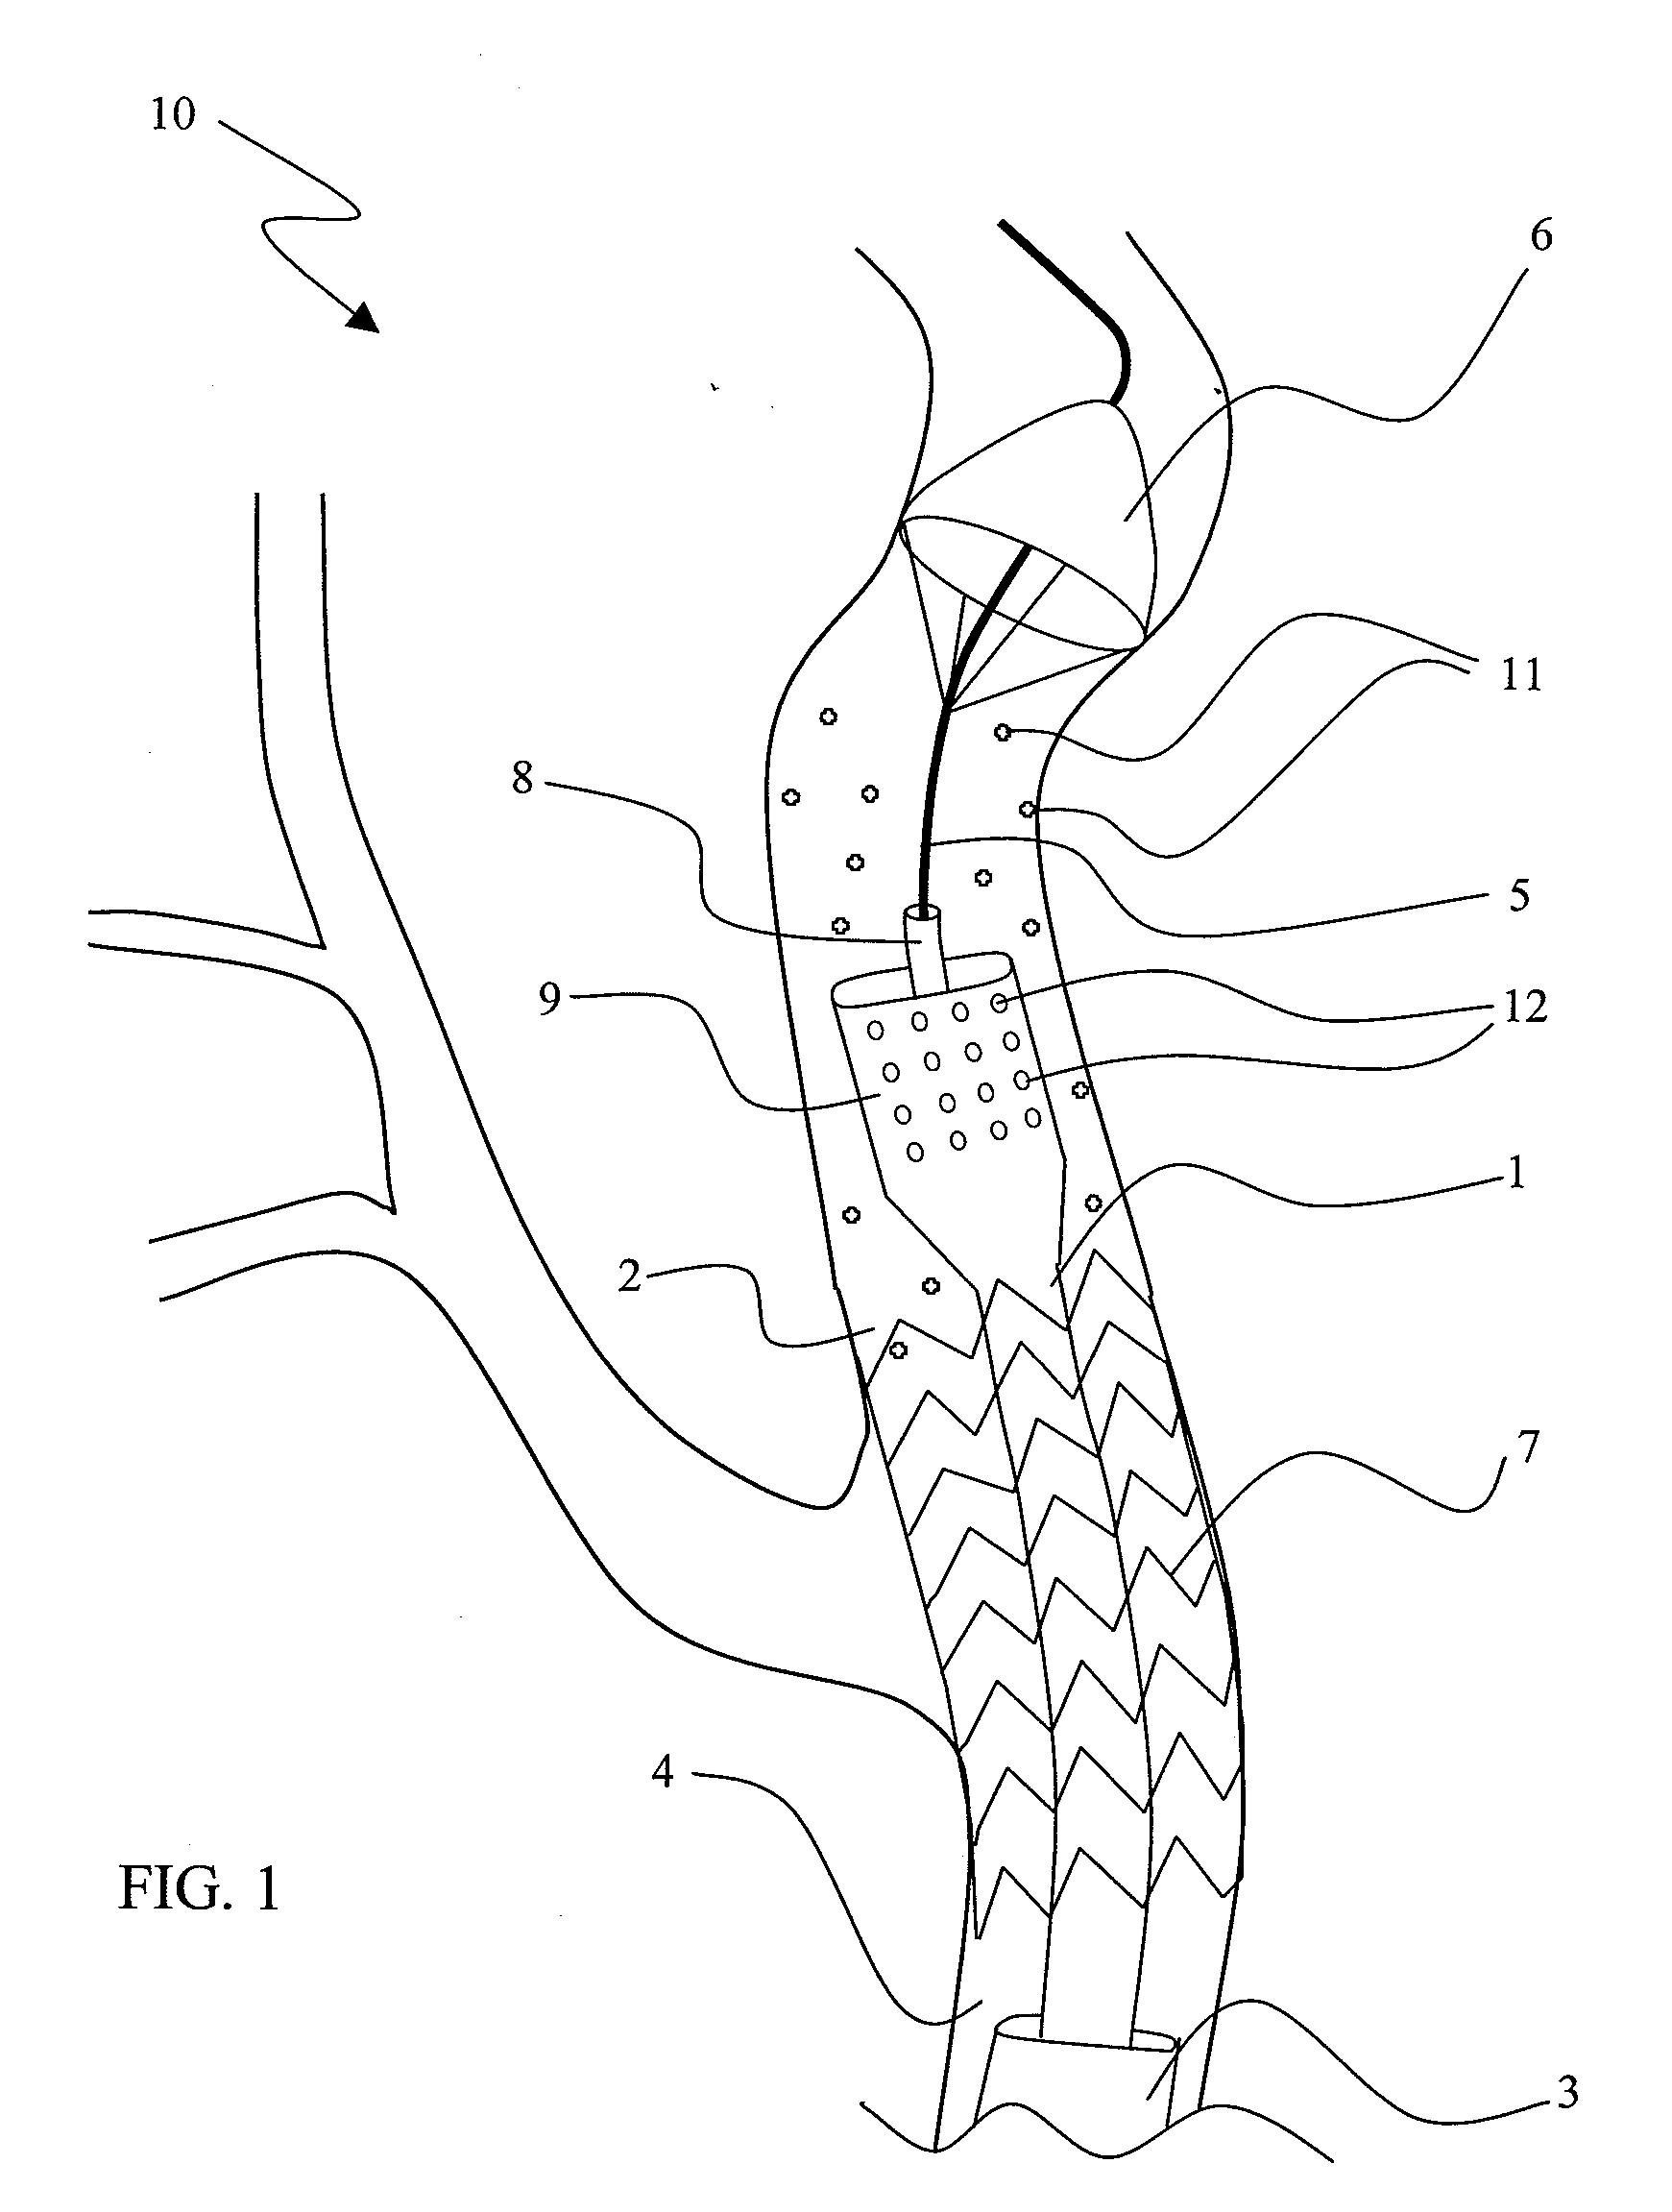 Vascular catheter with aspiration capabilities and expanded distal tip